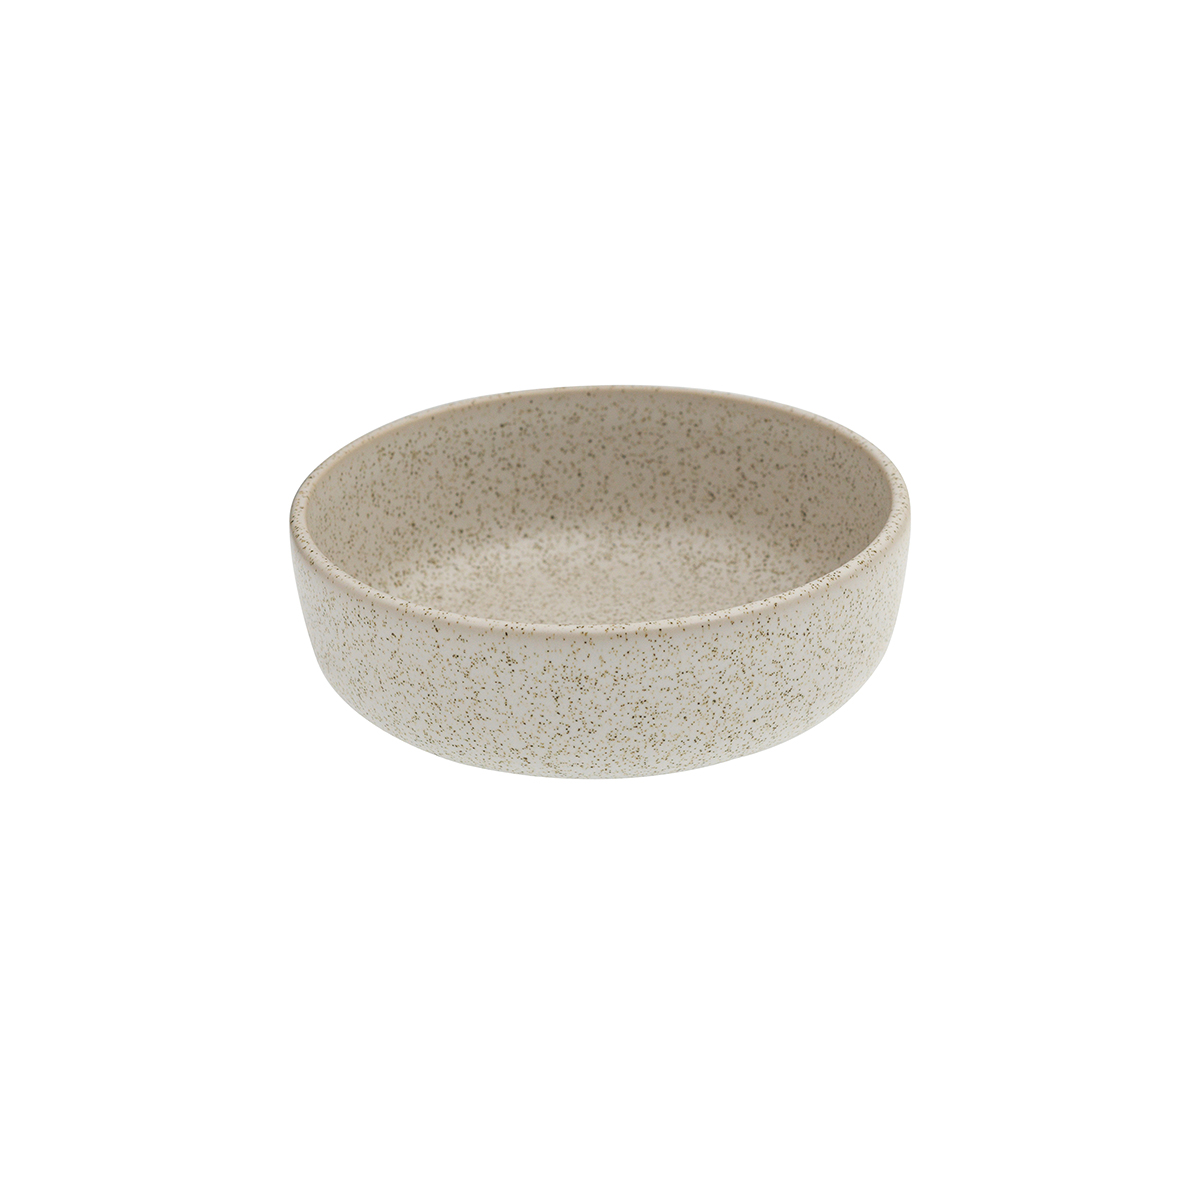 EASE CLAY ROUND BOWLS